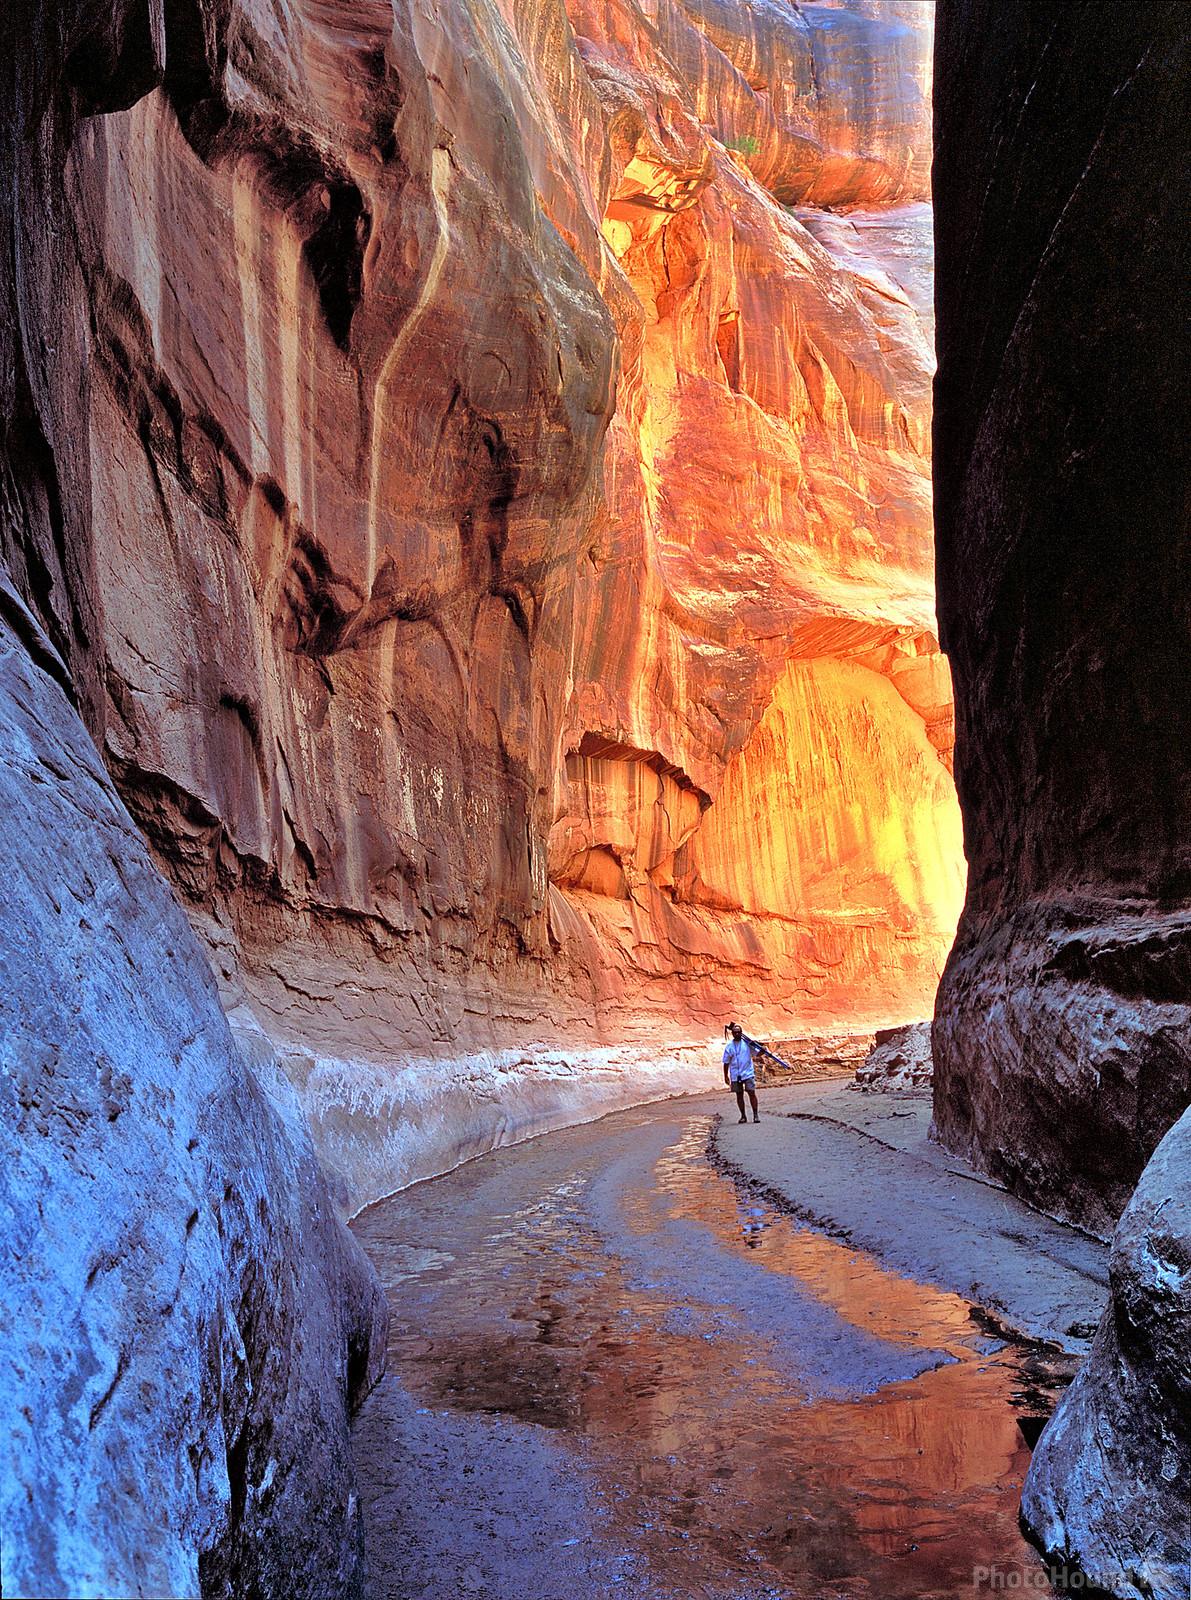 Image of Paria Canyon/Buckskin Gulch Confluence by Laurent Martres